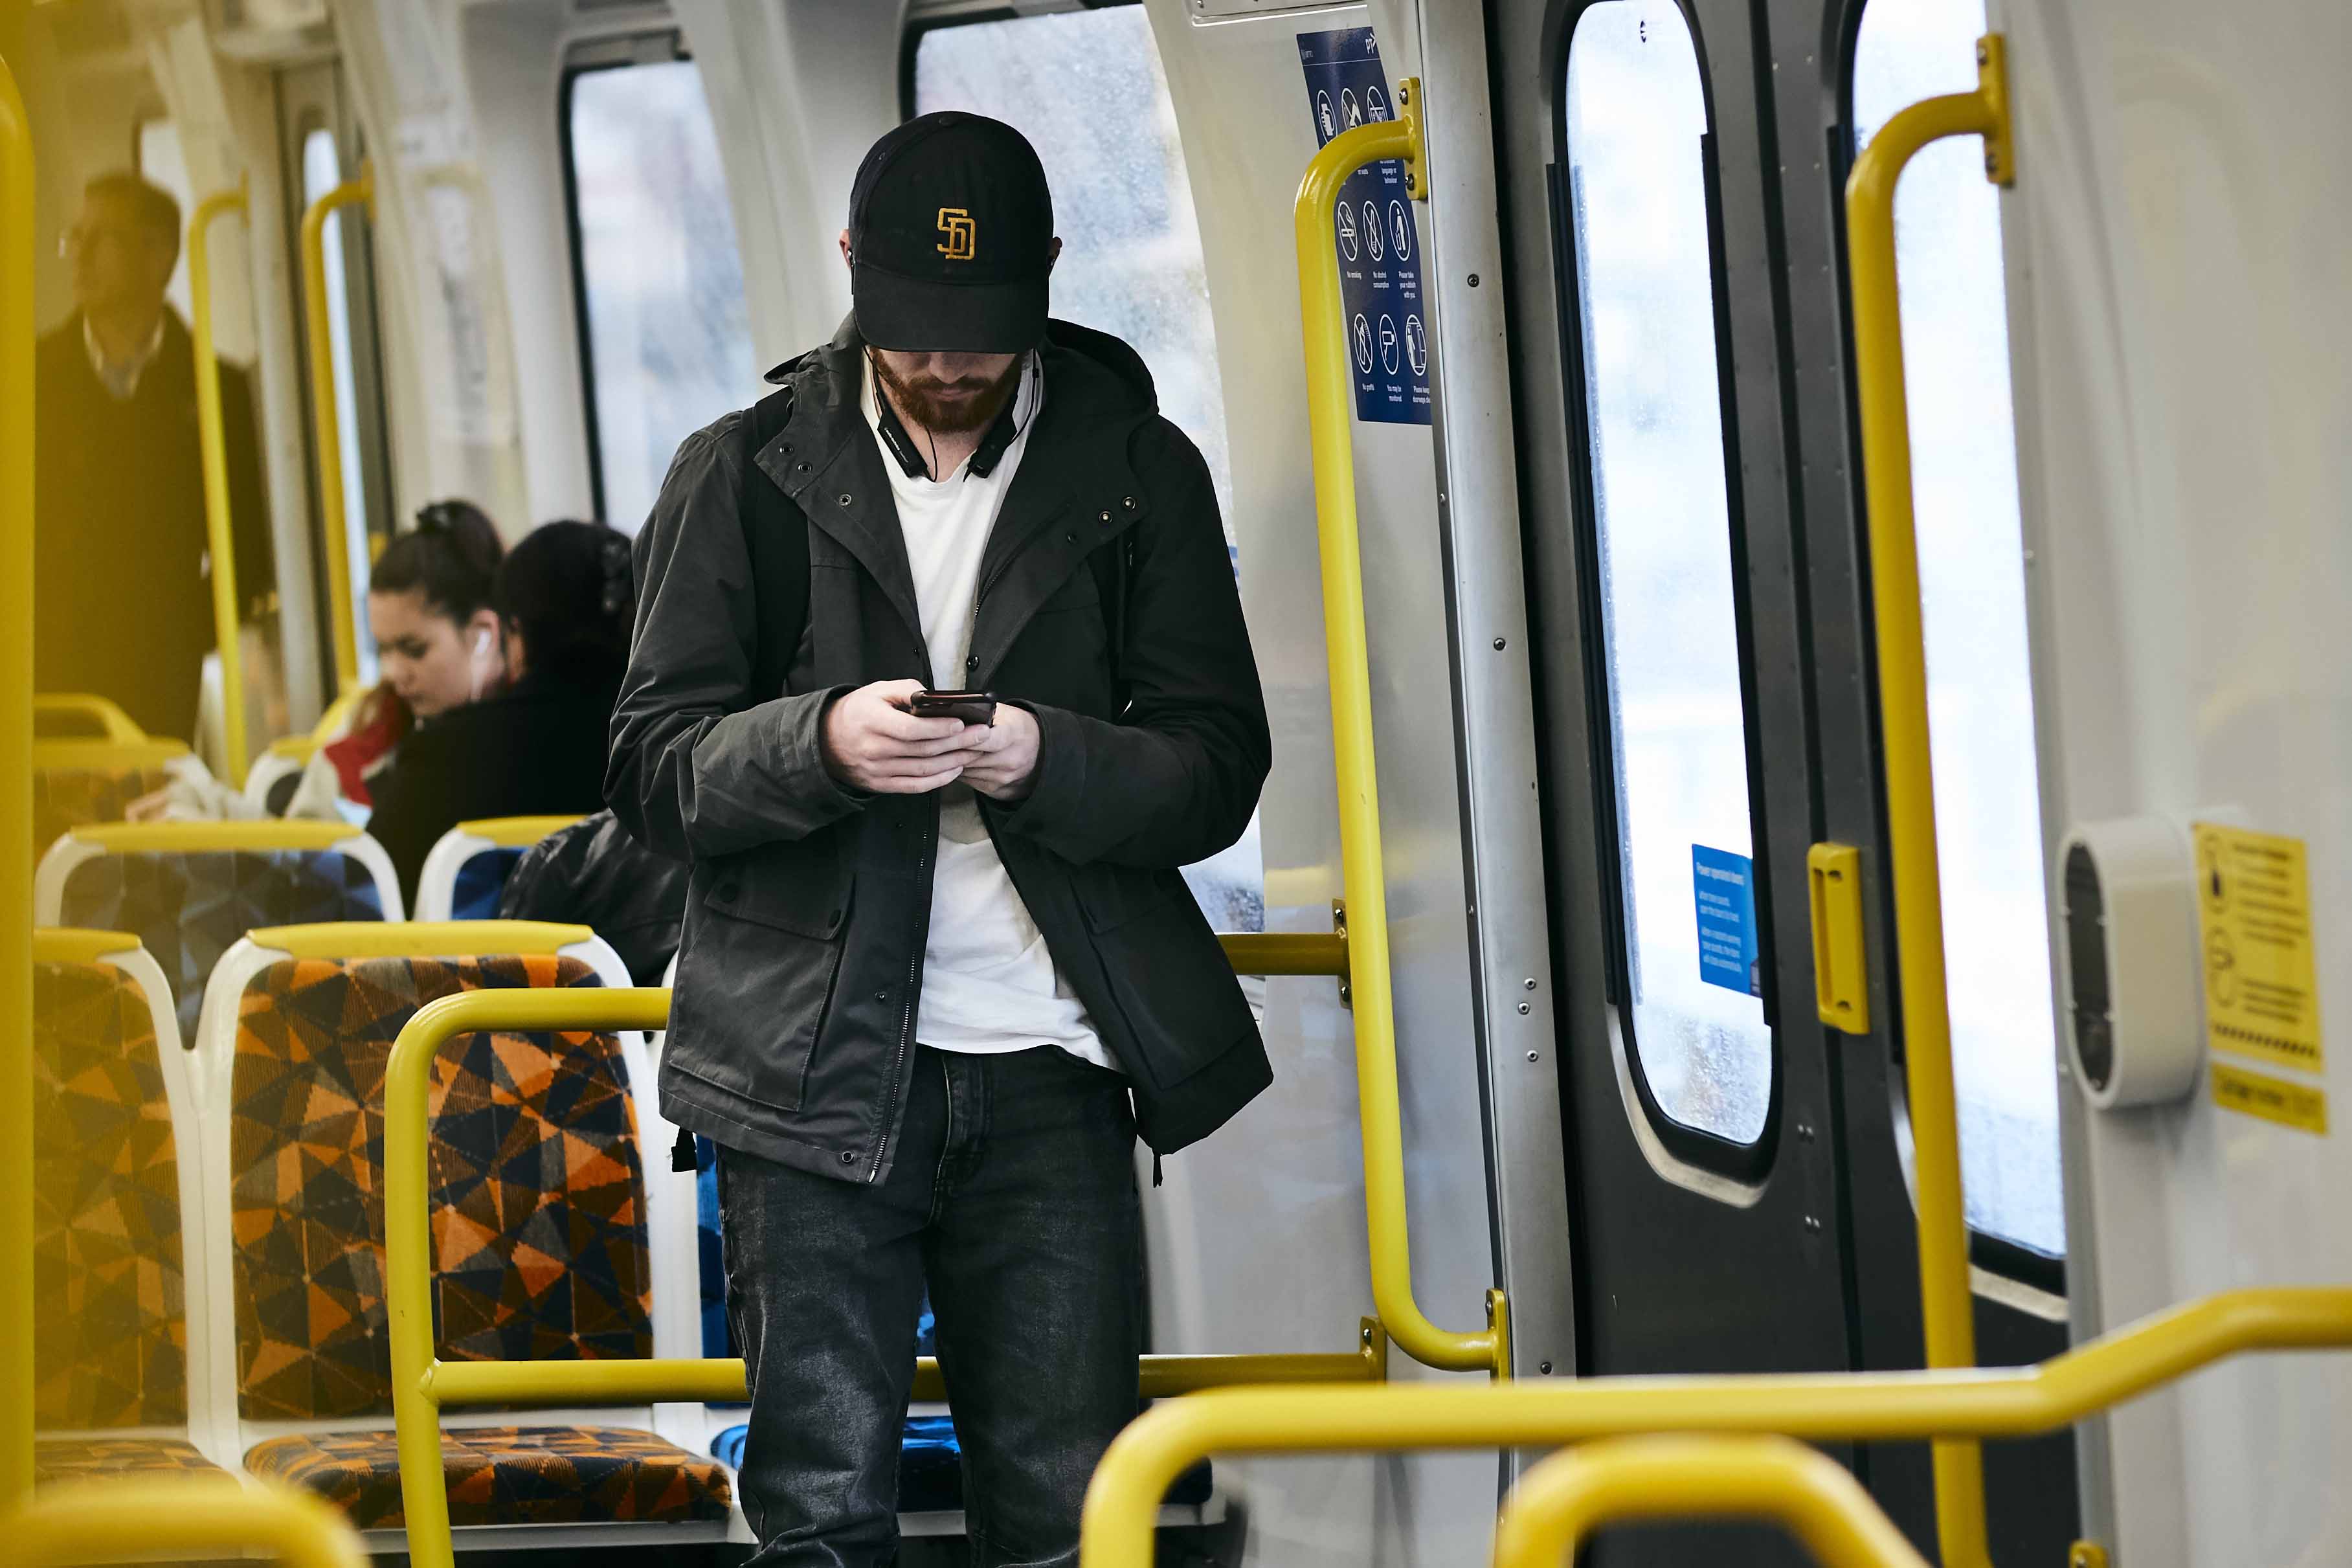 Image shows a man looking at his phone while travelling on a Metro train.